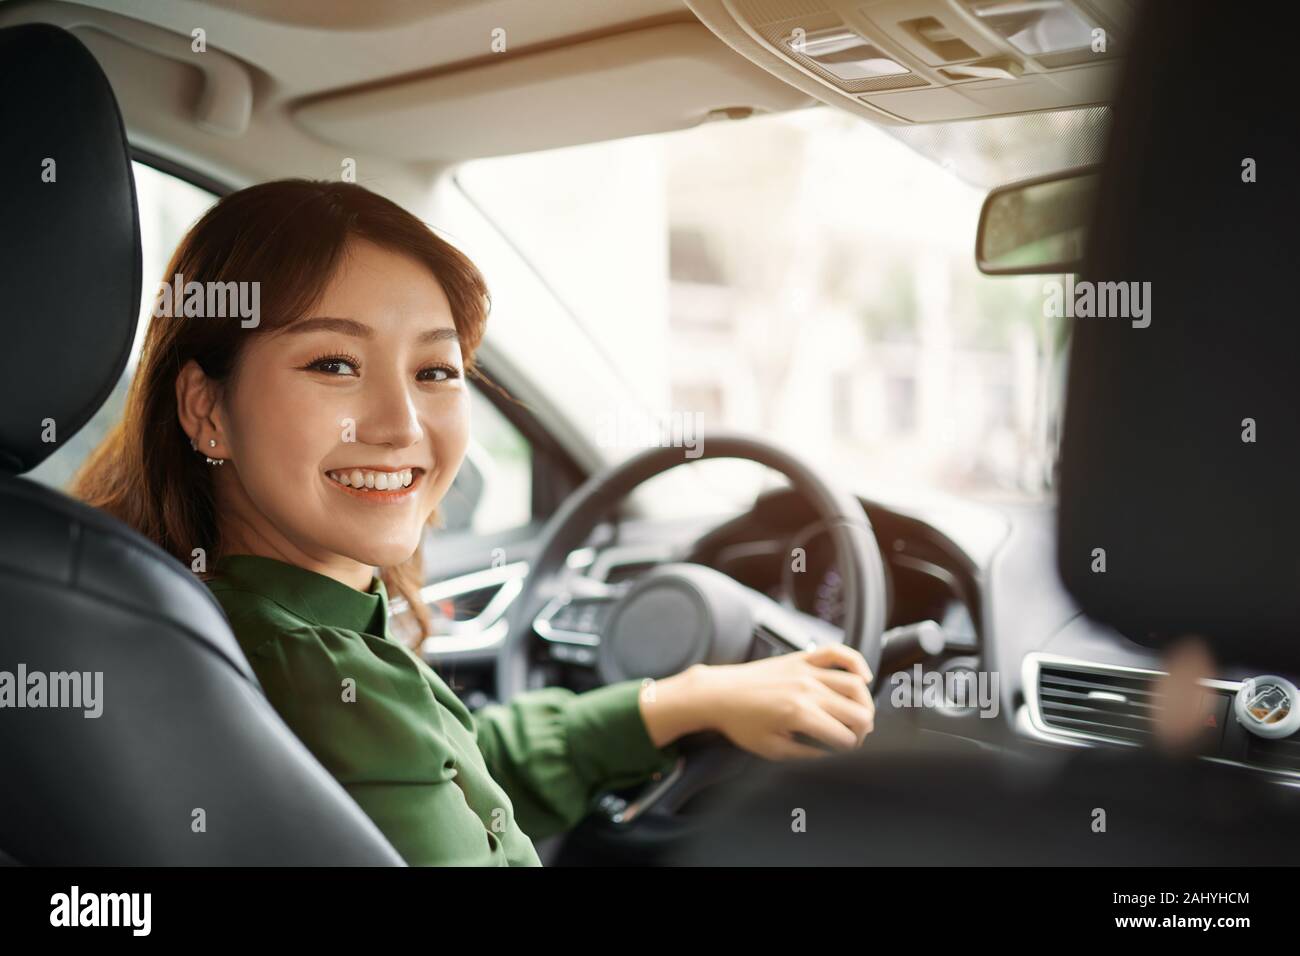 Confident and beautiful. Rear view of attractive young woman in casual wear looking over her shoulder while driving a car Stock Photo